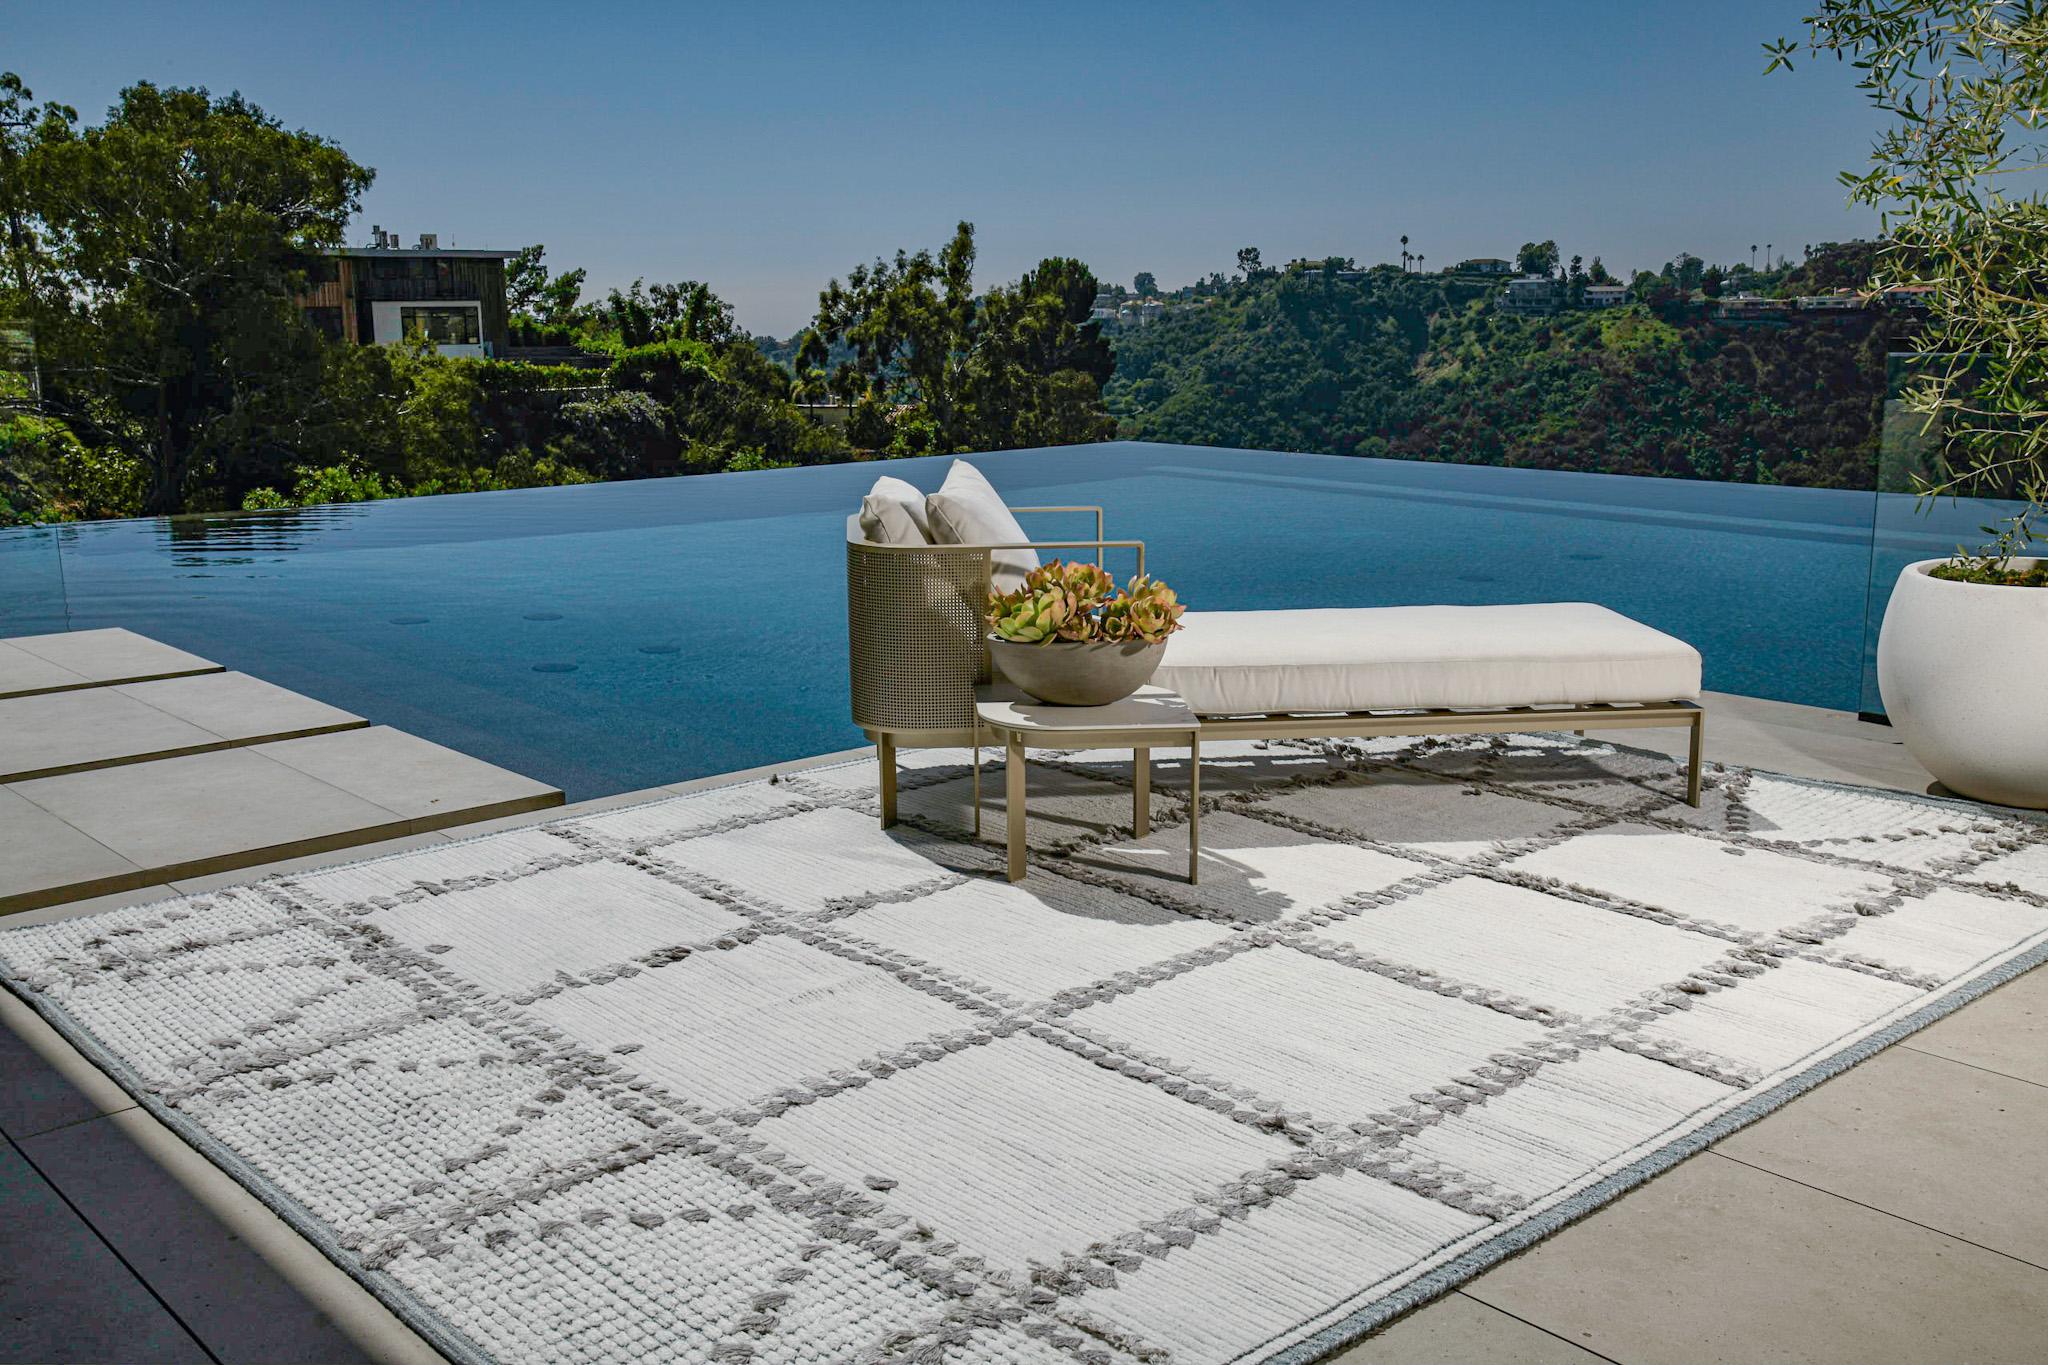 Enjoy the fresh air with Nasim, rugs that work indoors and out.

Rug Number
31433
Size
9' 1